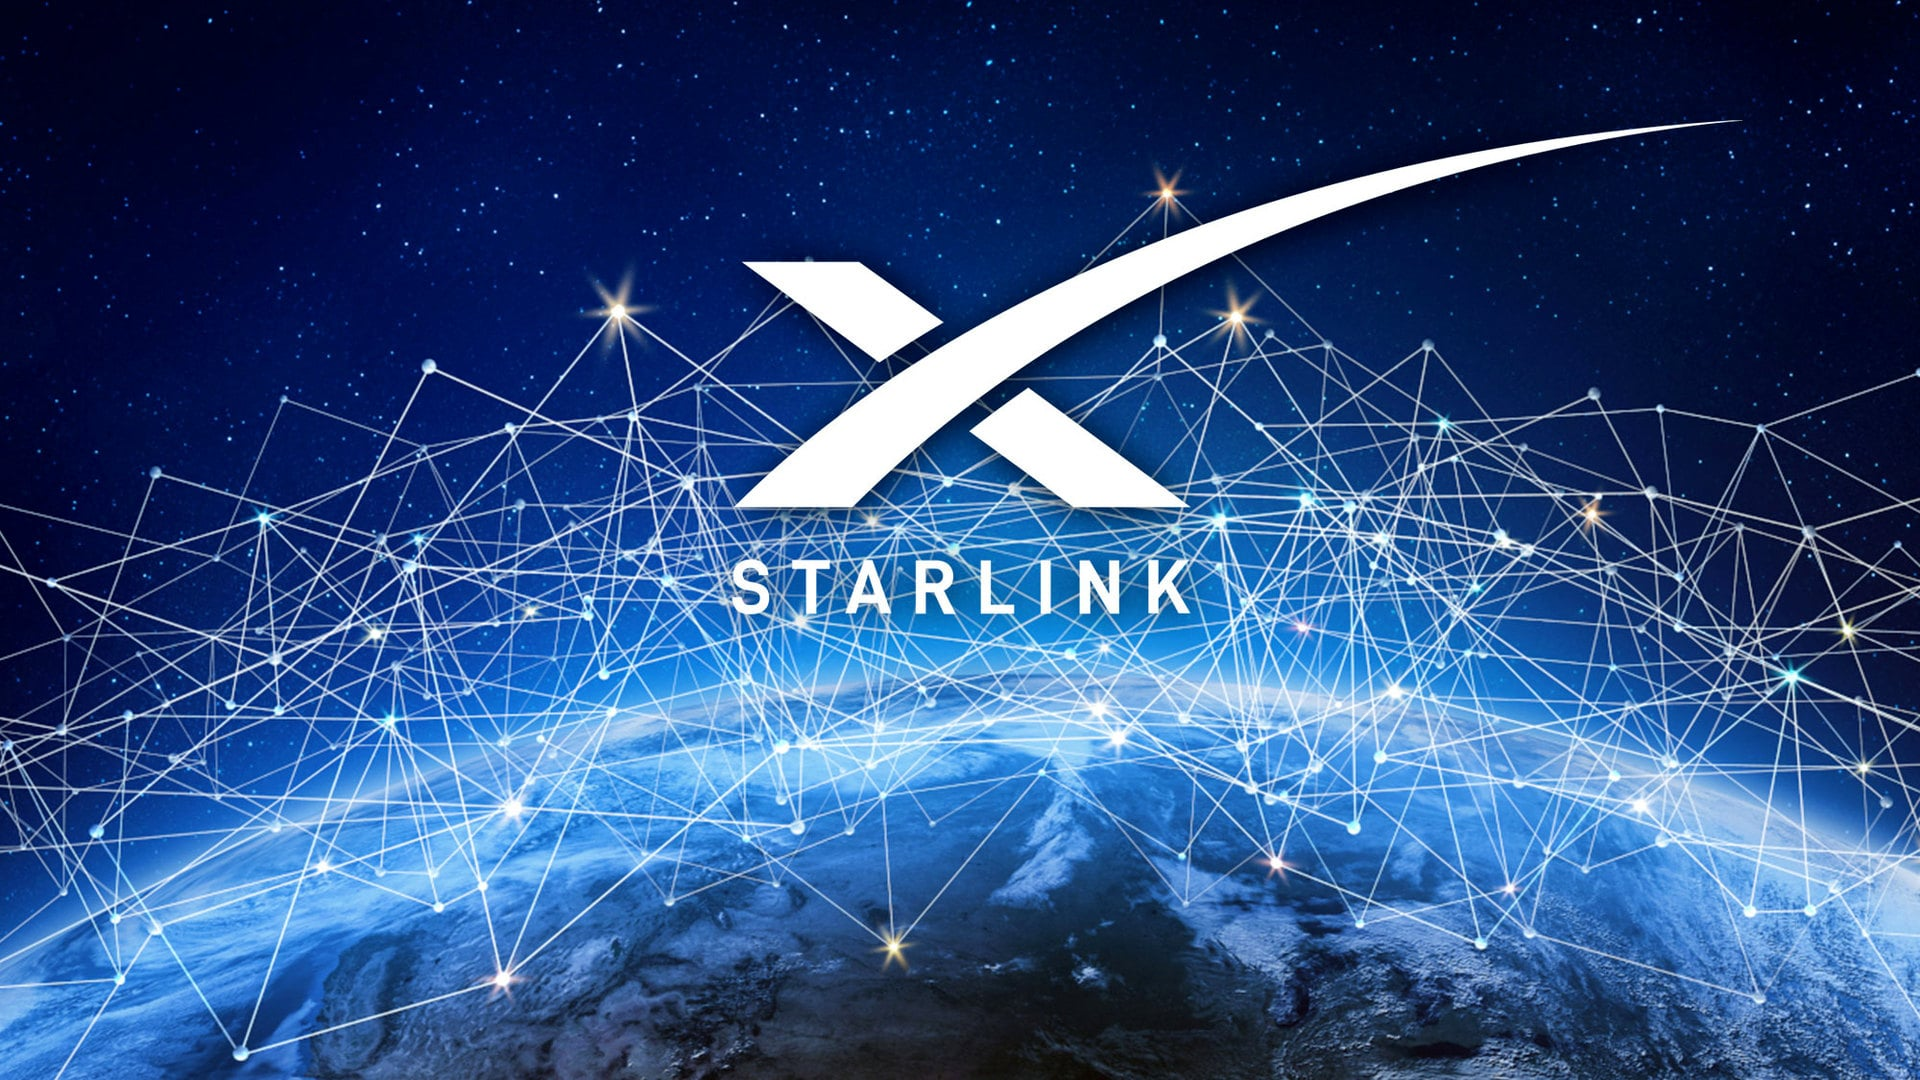 Elon Musk's Starlink Internet - Learn Facts About this Project